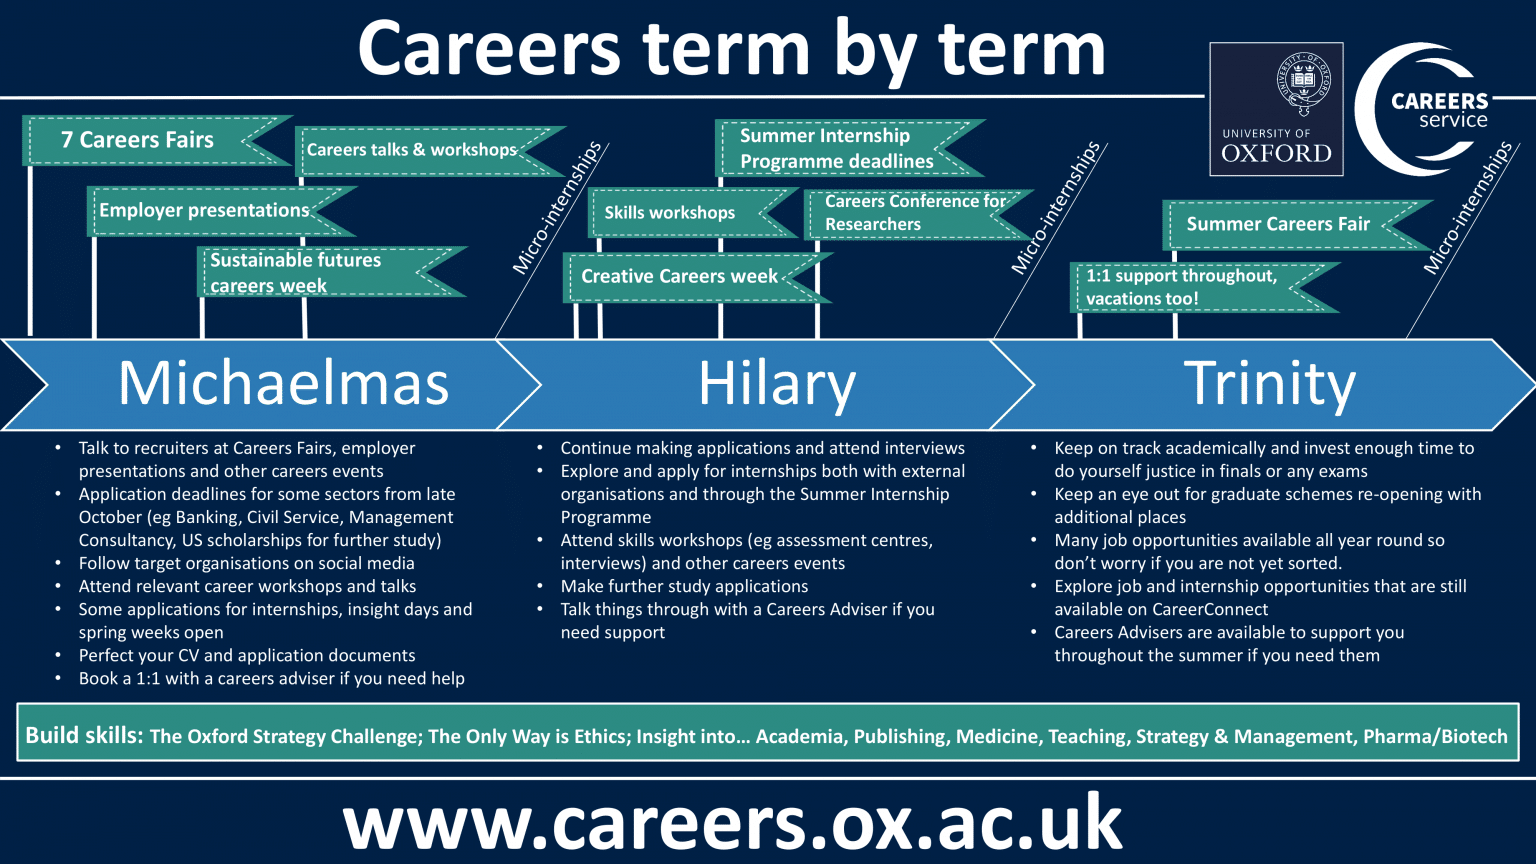 The University Careers Service's term-by-term poster